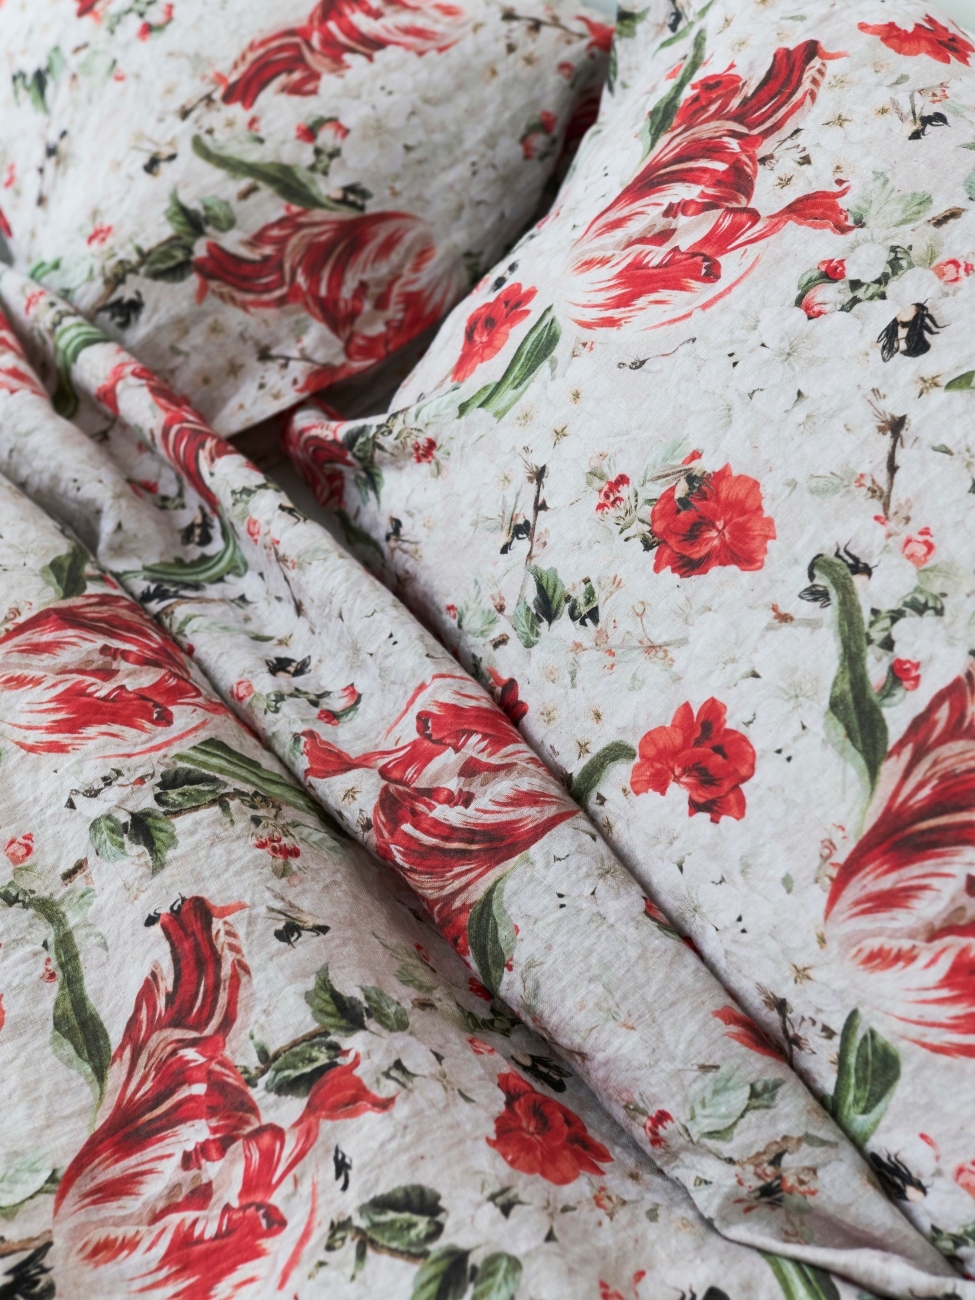 Buy wholesale Cotton satin fitted sheet 160x200 cm with Floral print